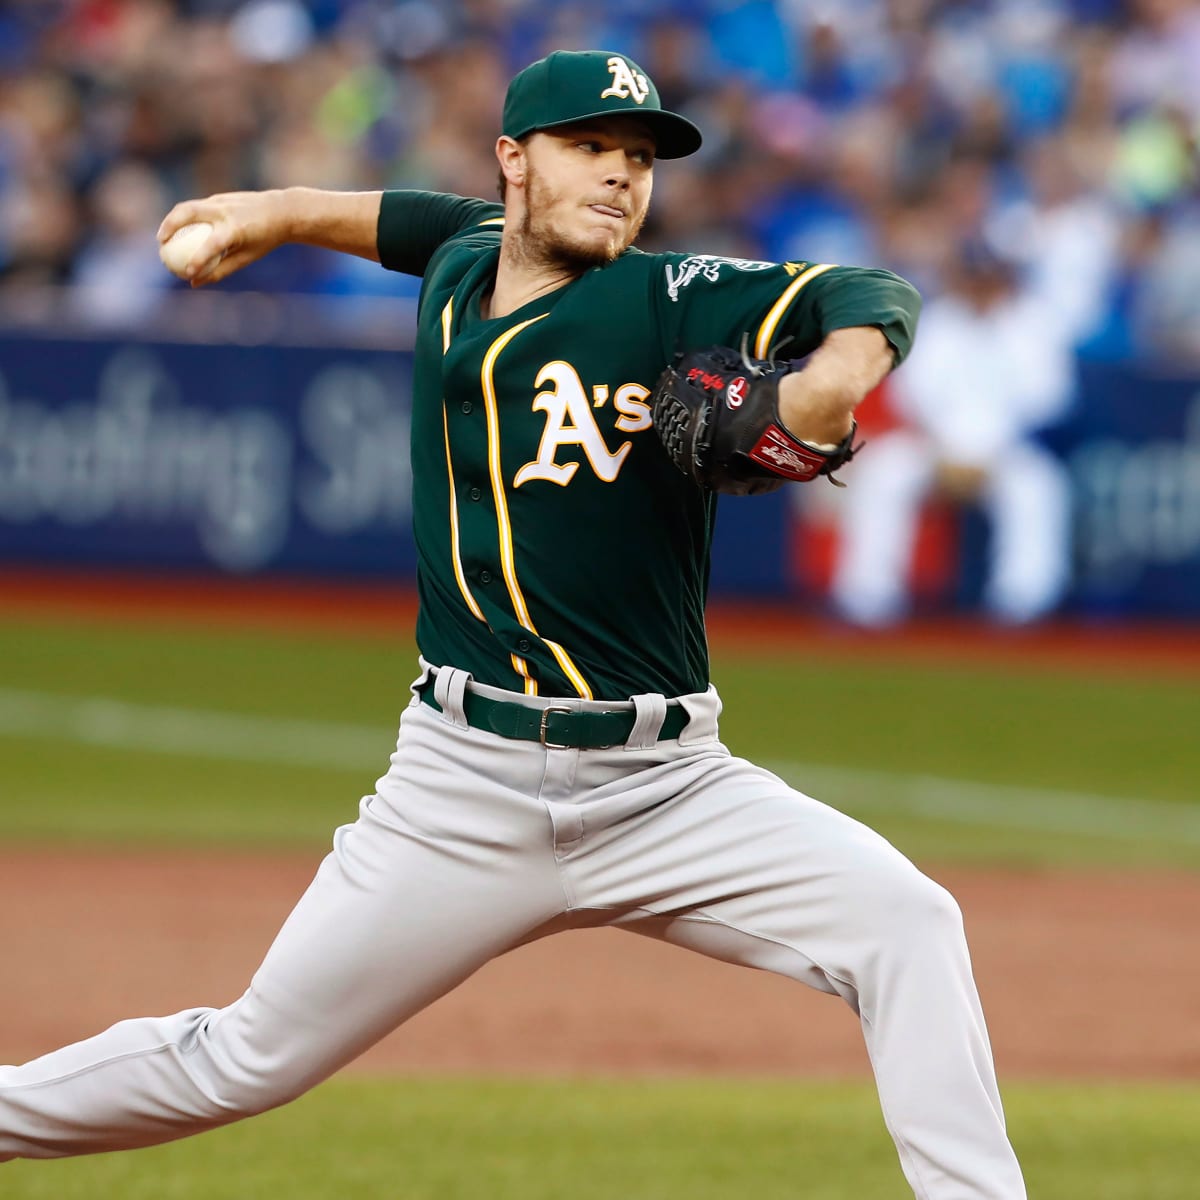 Yankees Acquire Sonny Gray From Oakland as Trade Deadline Arrives